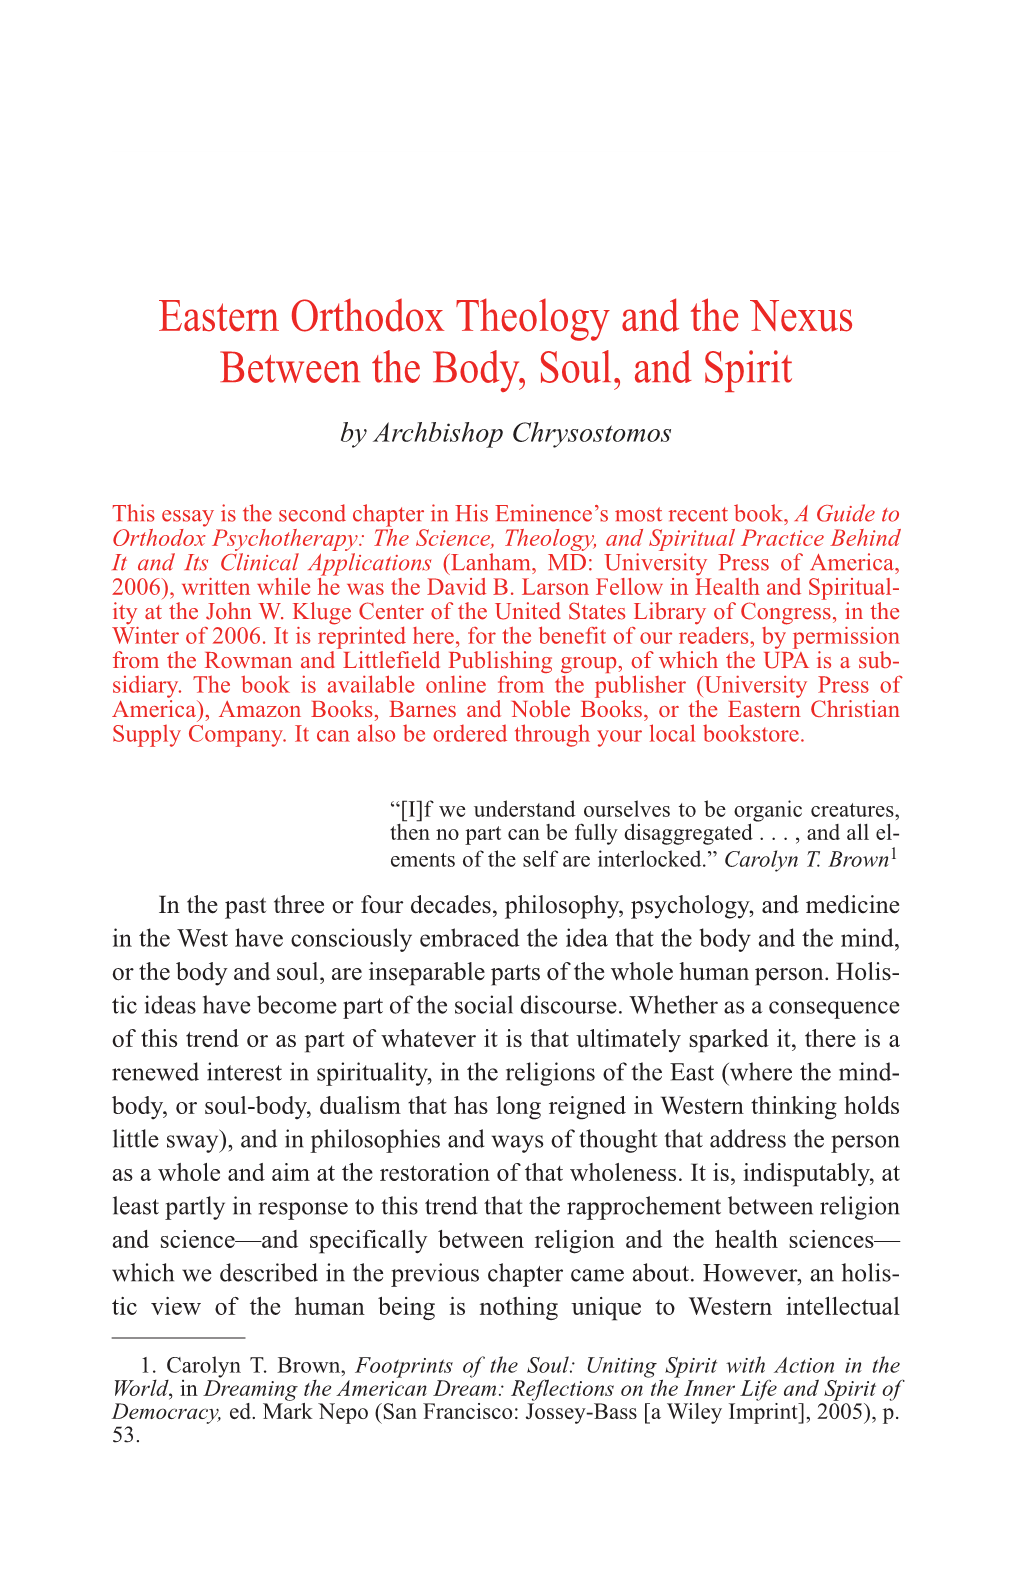 Eastern Orthodox Theology and the Nexus Between the Body, Soul, and Spirit by Archbishop Chrysostomos